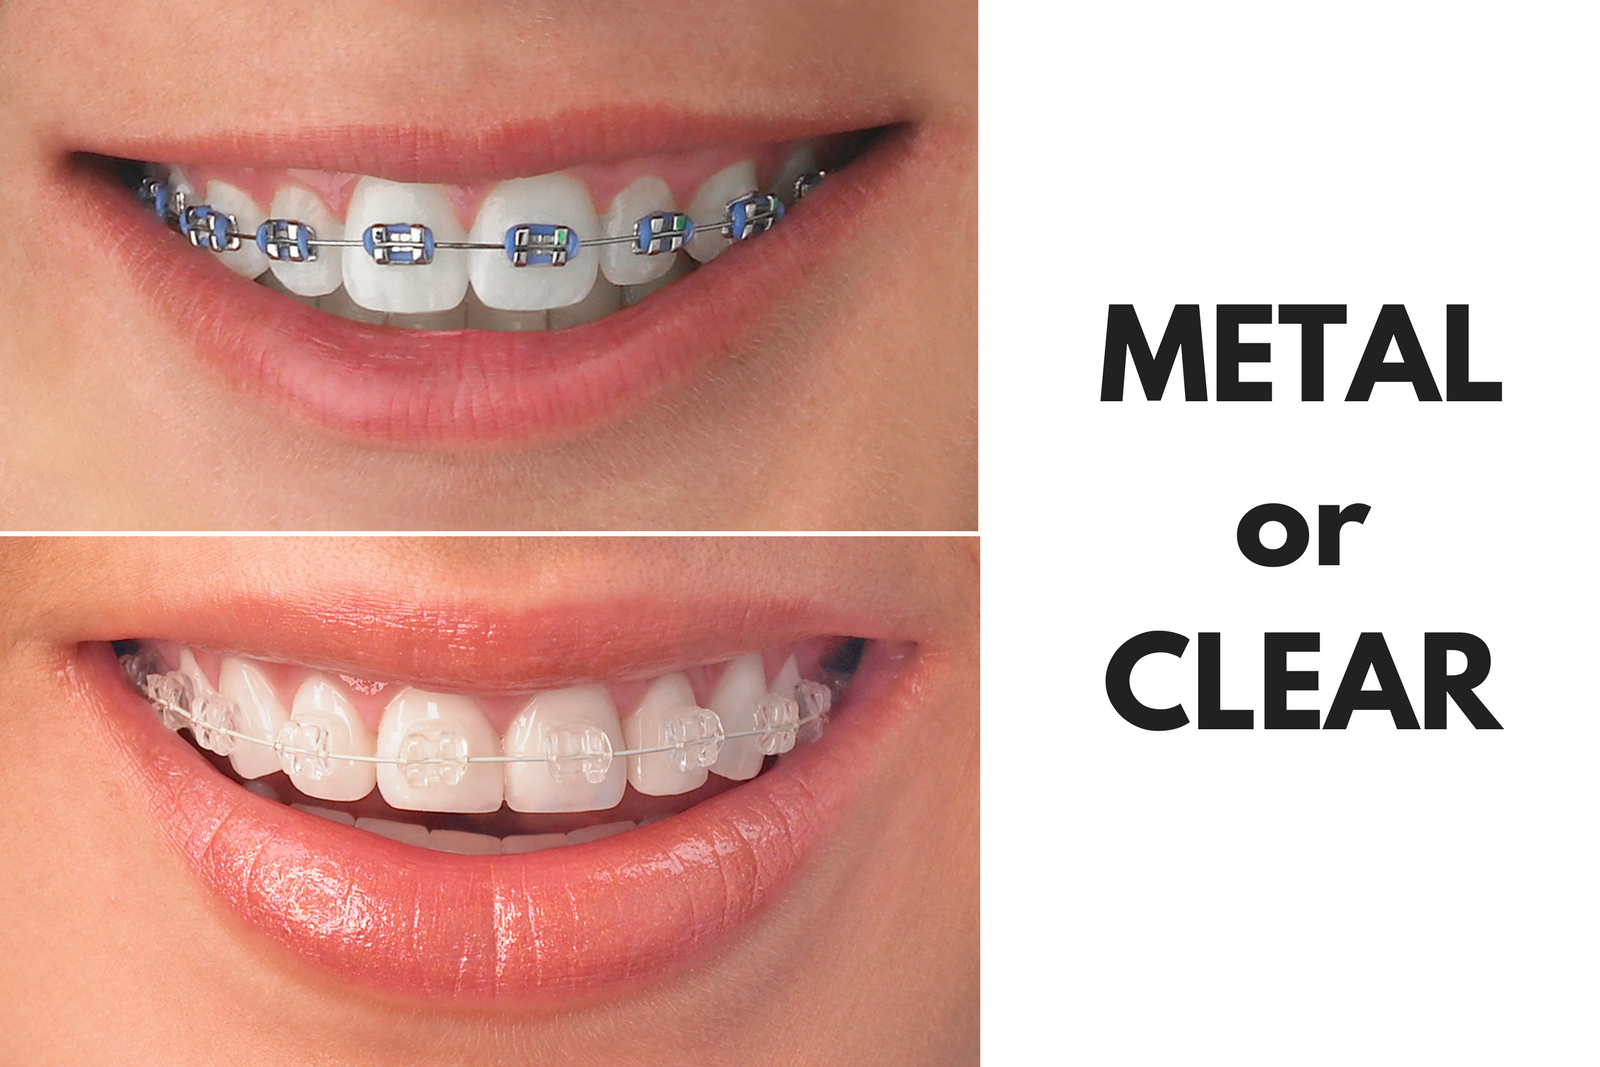 Ask Your College Station Dentist: Should I Get Metal or Clear Braces?